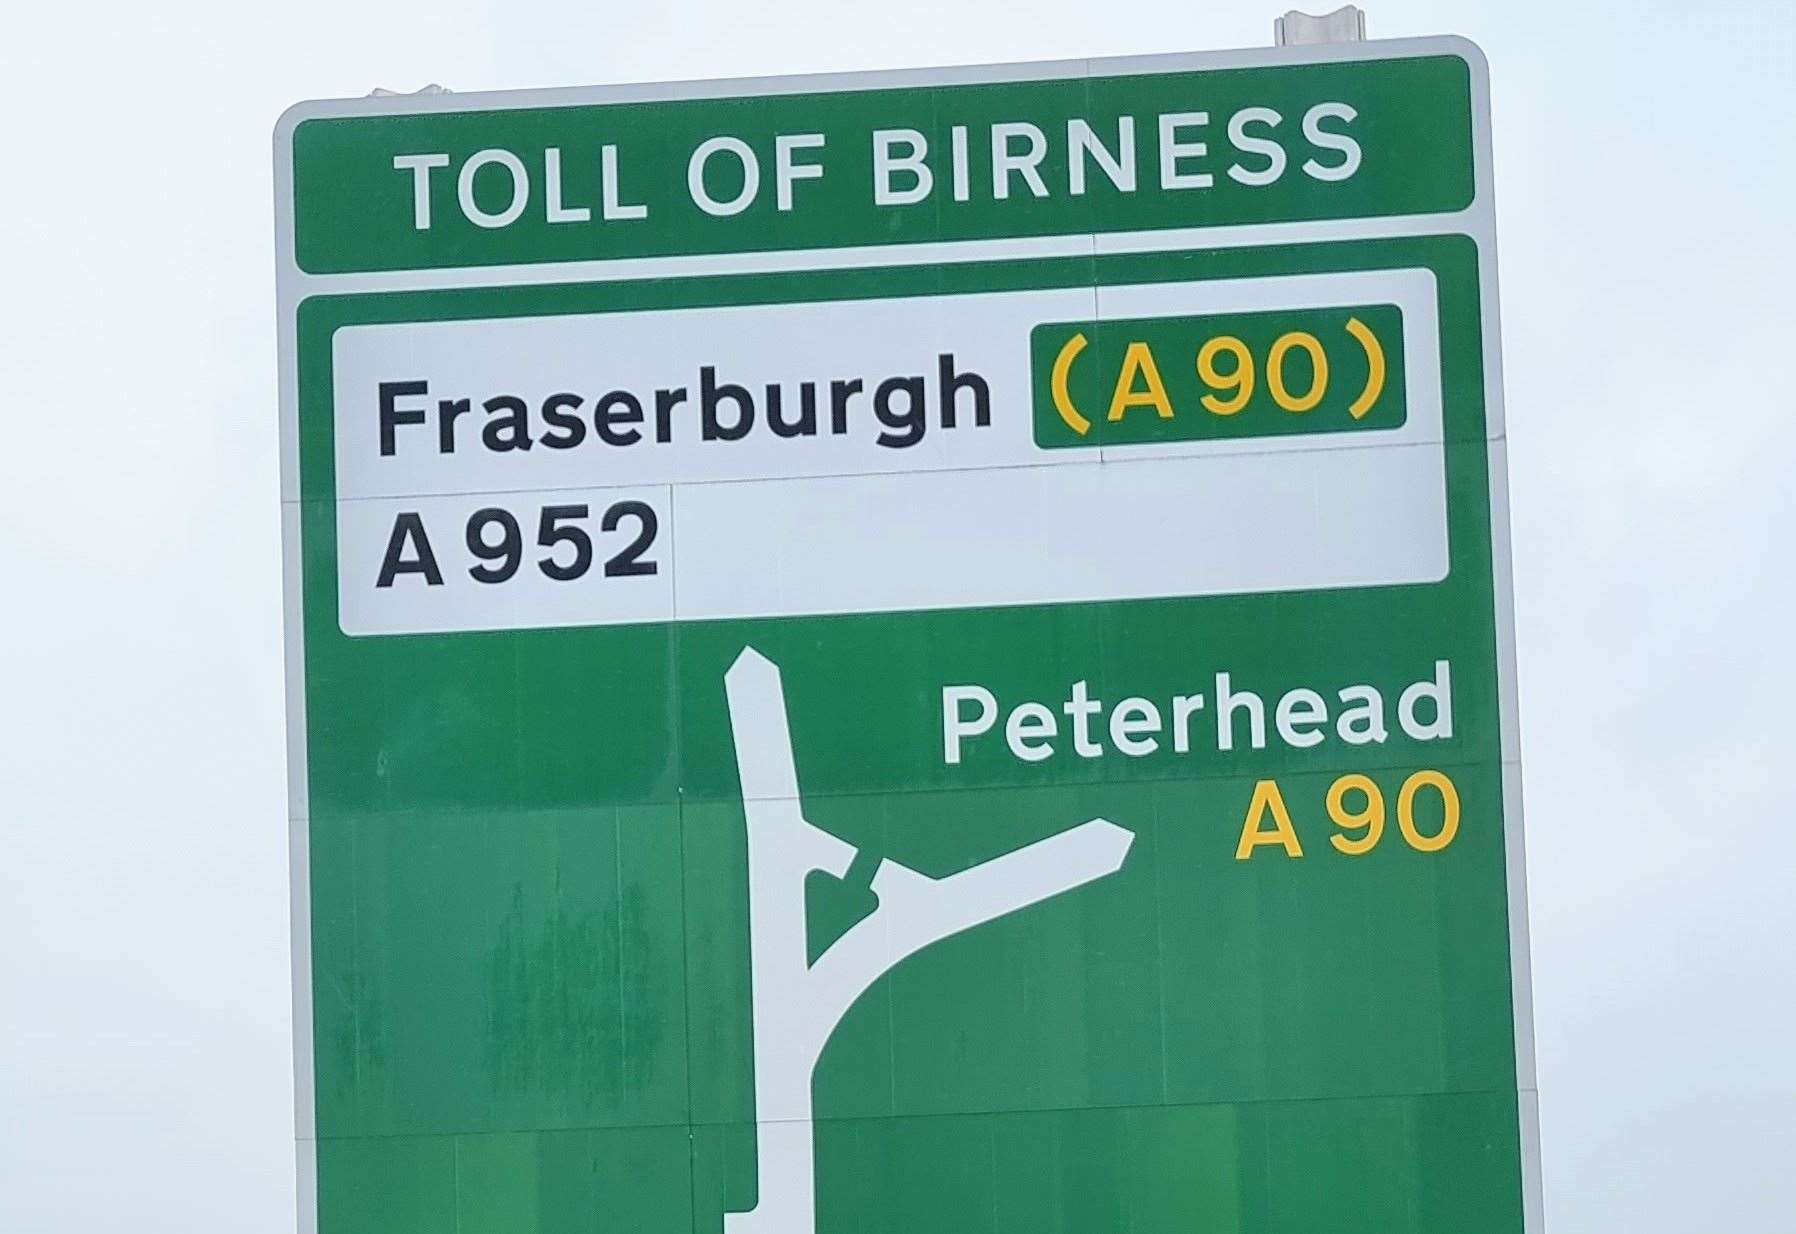 New consultation will focus on improvements for A90 and A952 roads